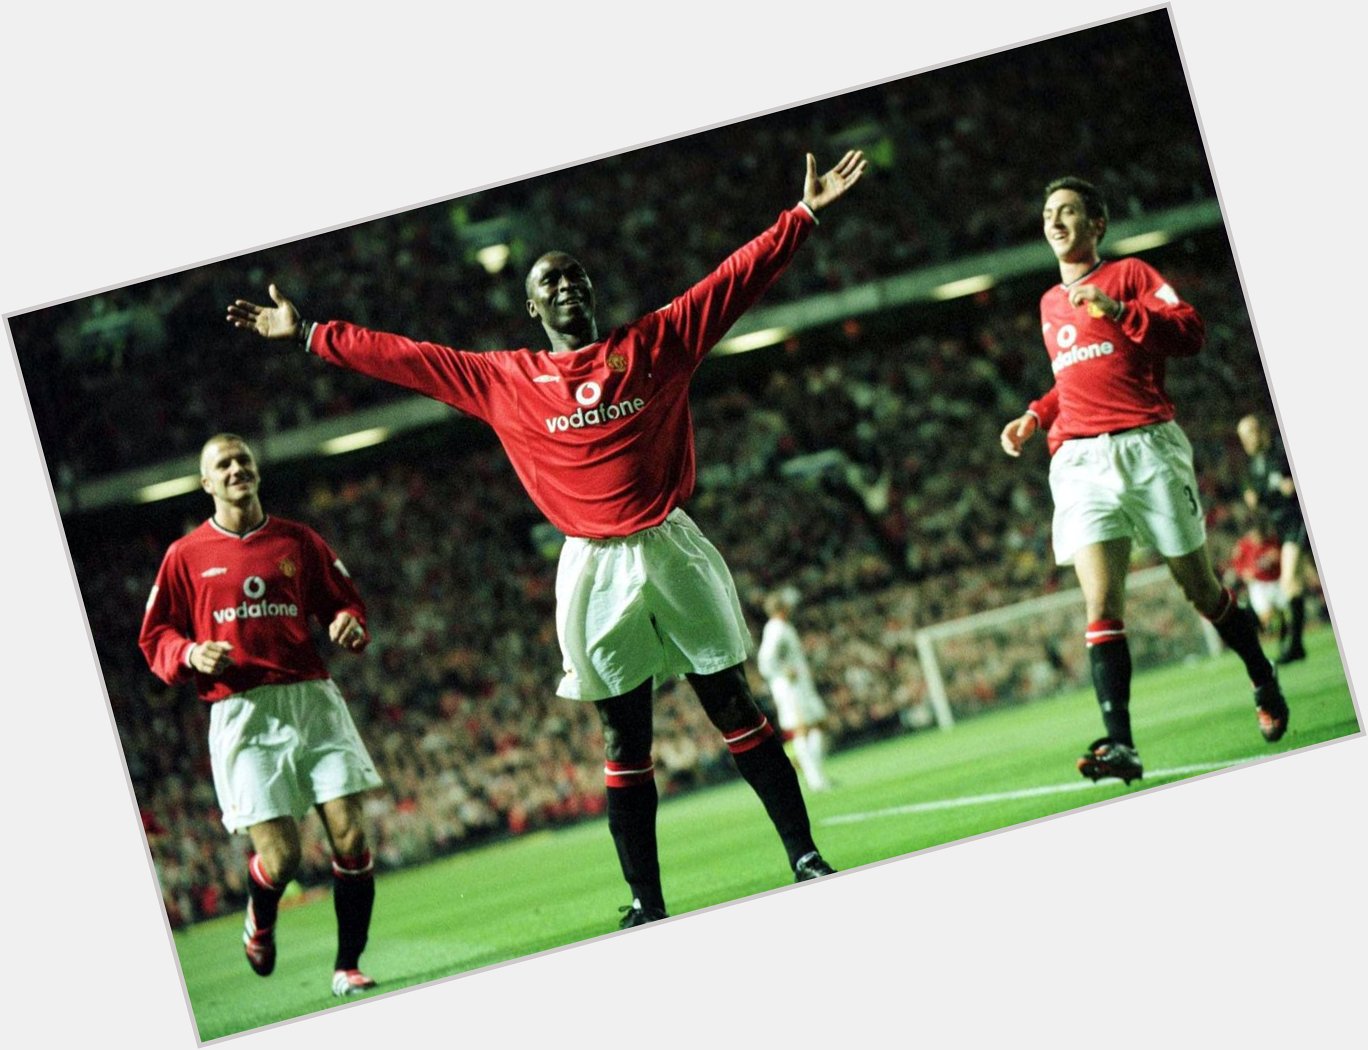   He gets the ball, He scores a goal..Andy Andy Cole.        ..Happy Birthday.. 